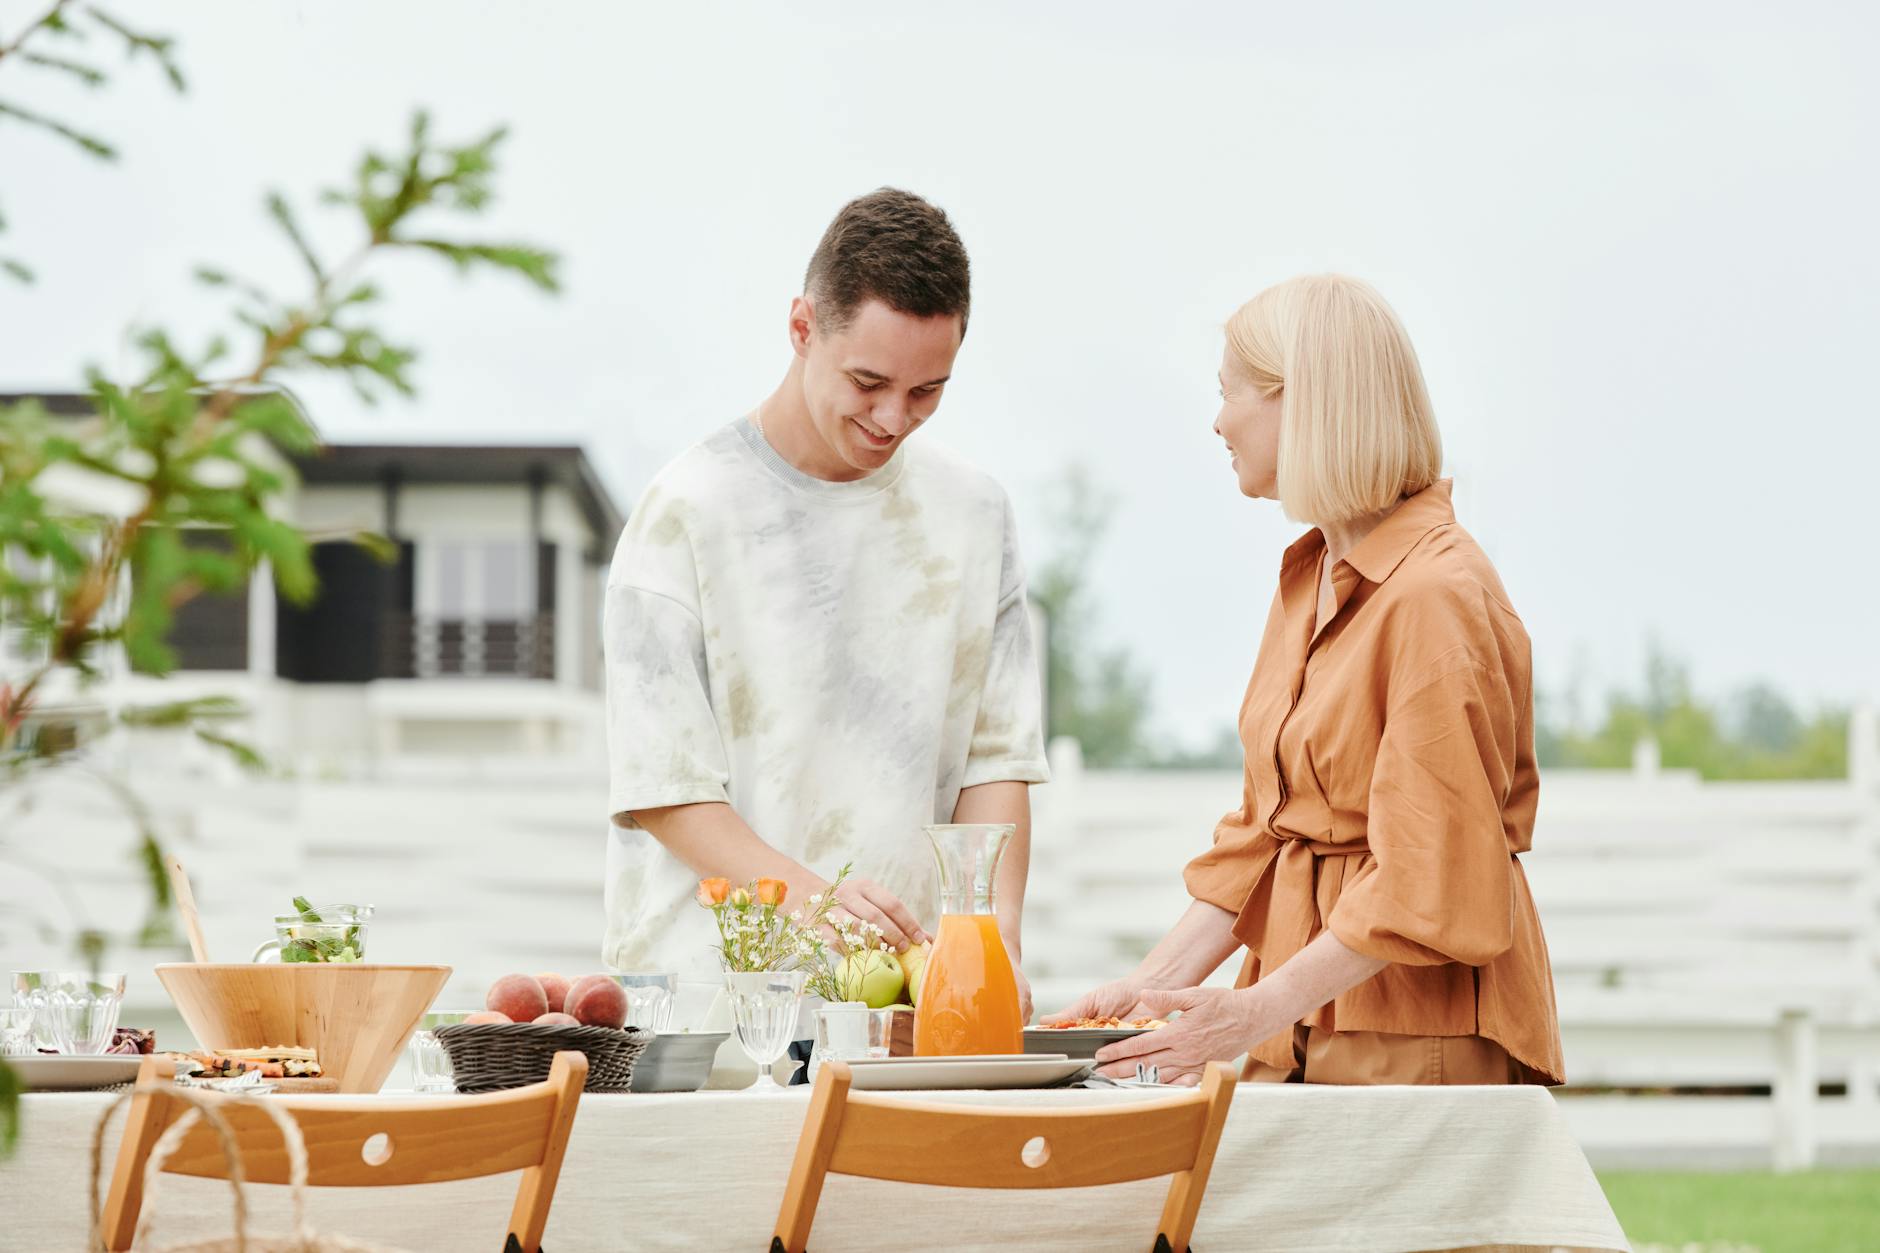 A Man and Woman Standing Beside the Table while Having Conversation